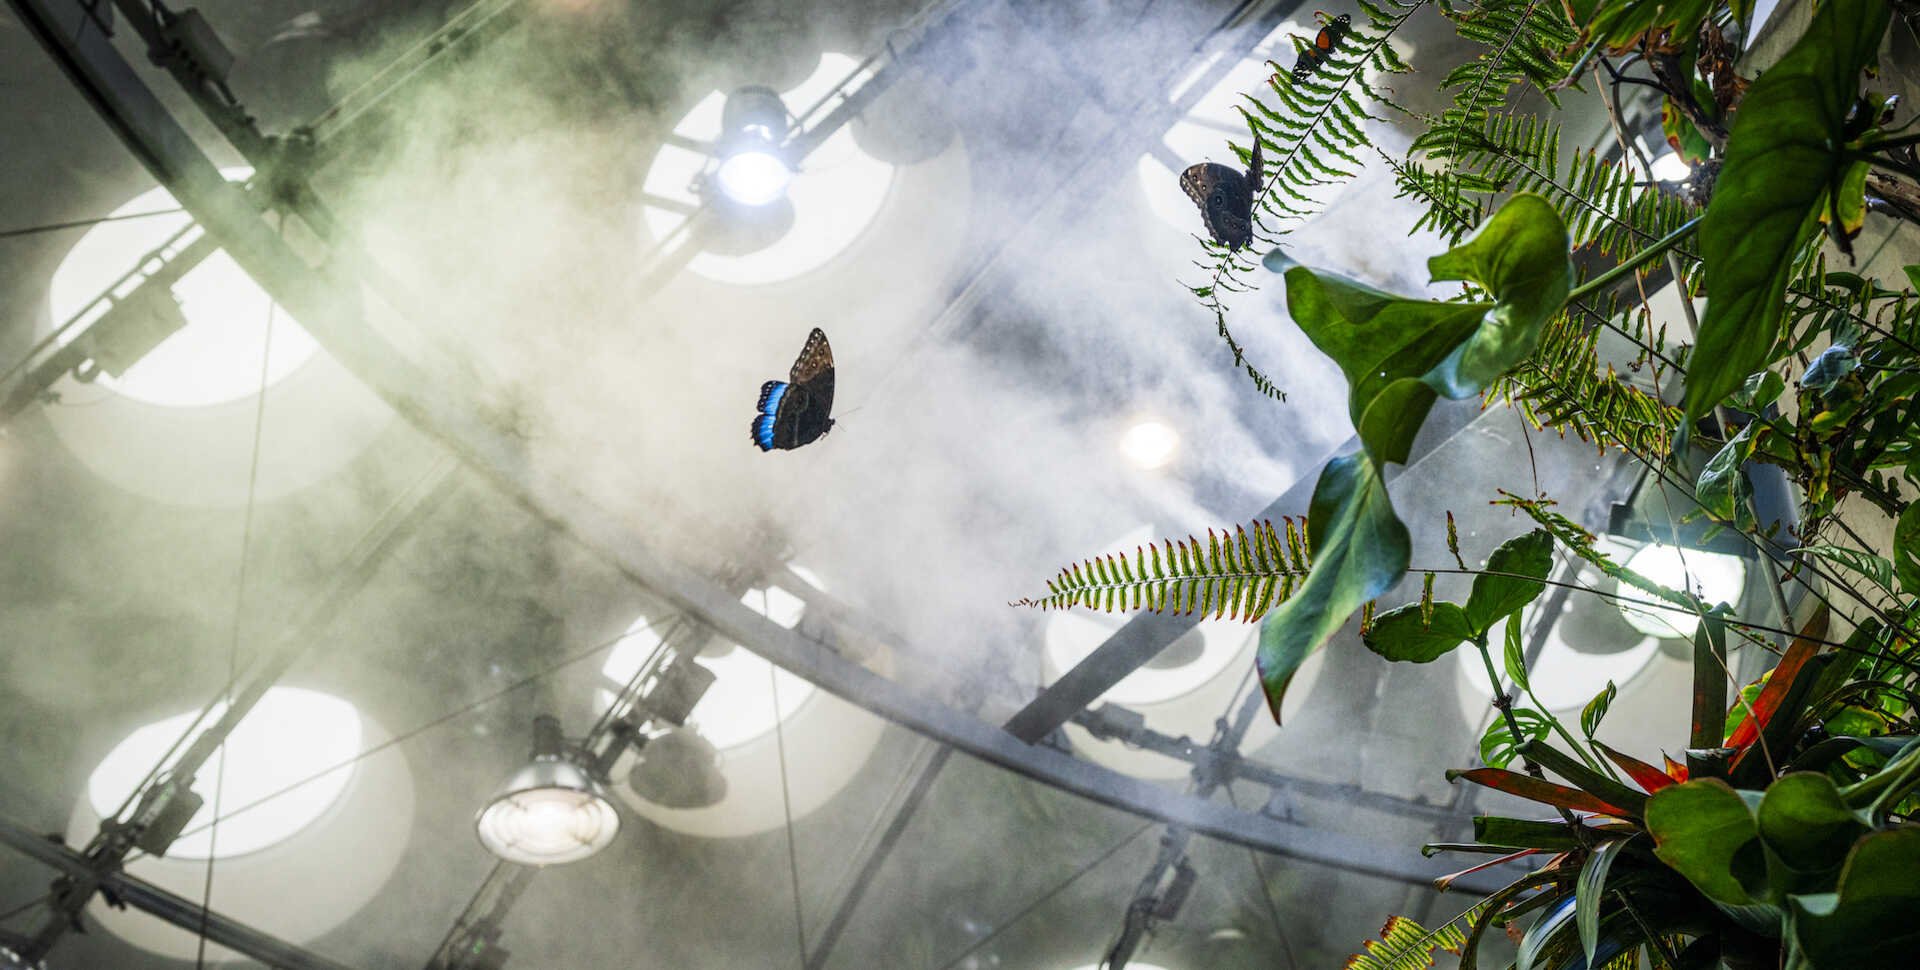 A blue morpho butterfly glides in front of fog and mist inside Osher Rainforests glass dome, with tropical foliage visible.